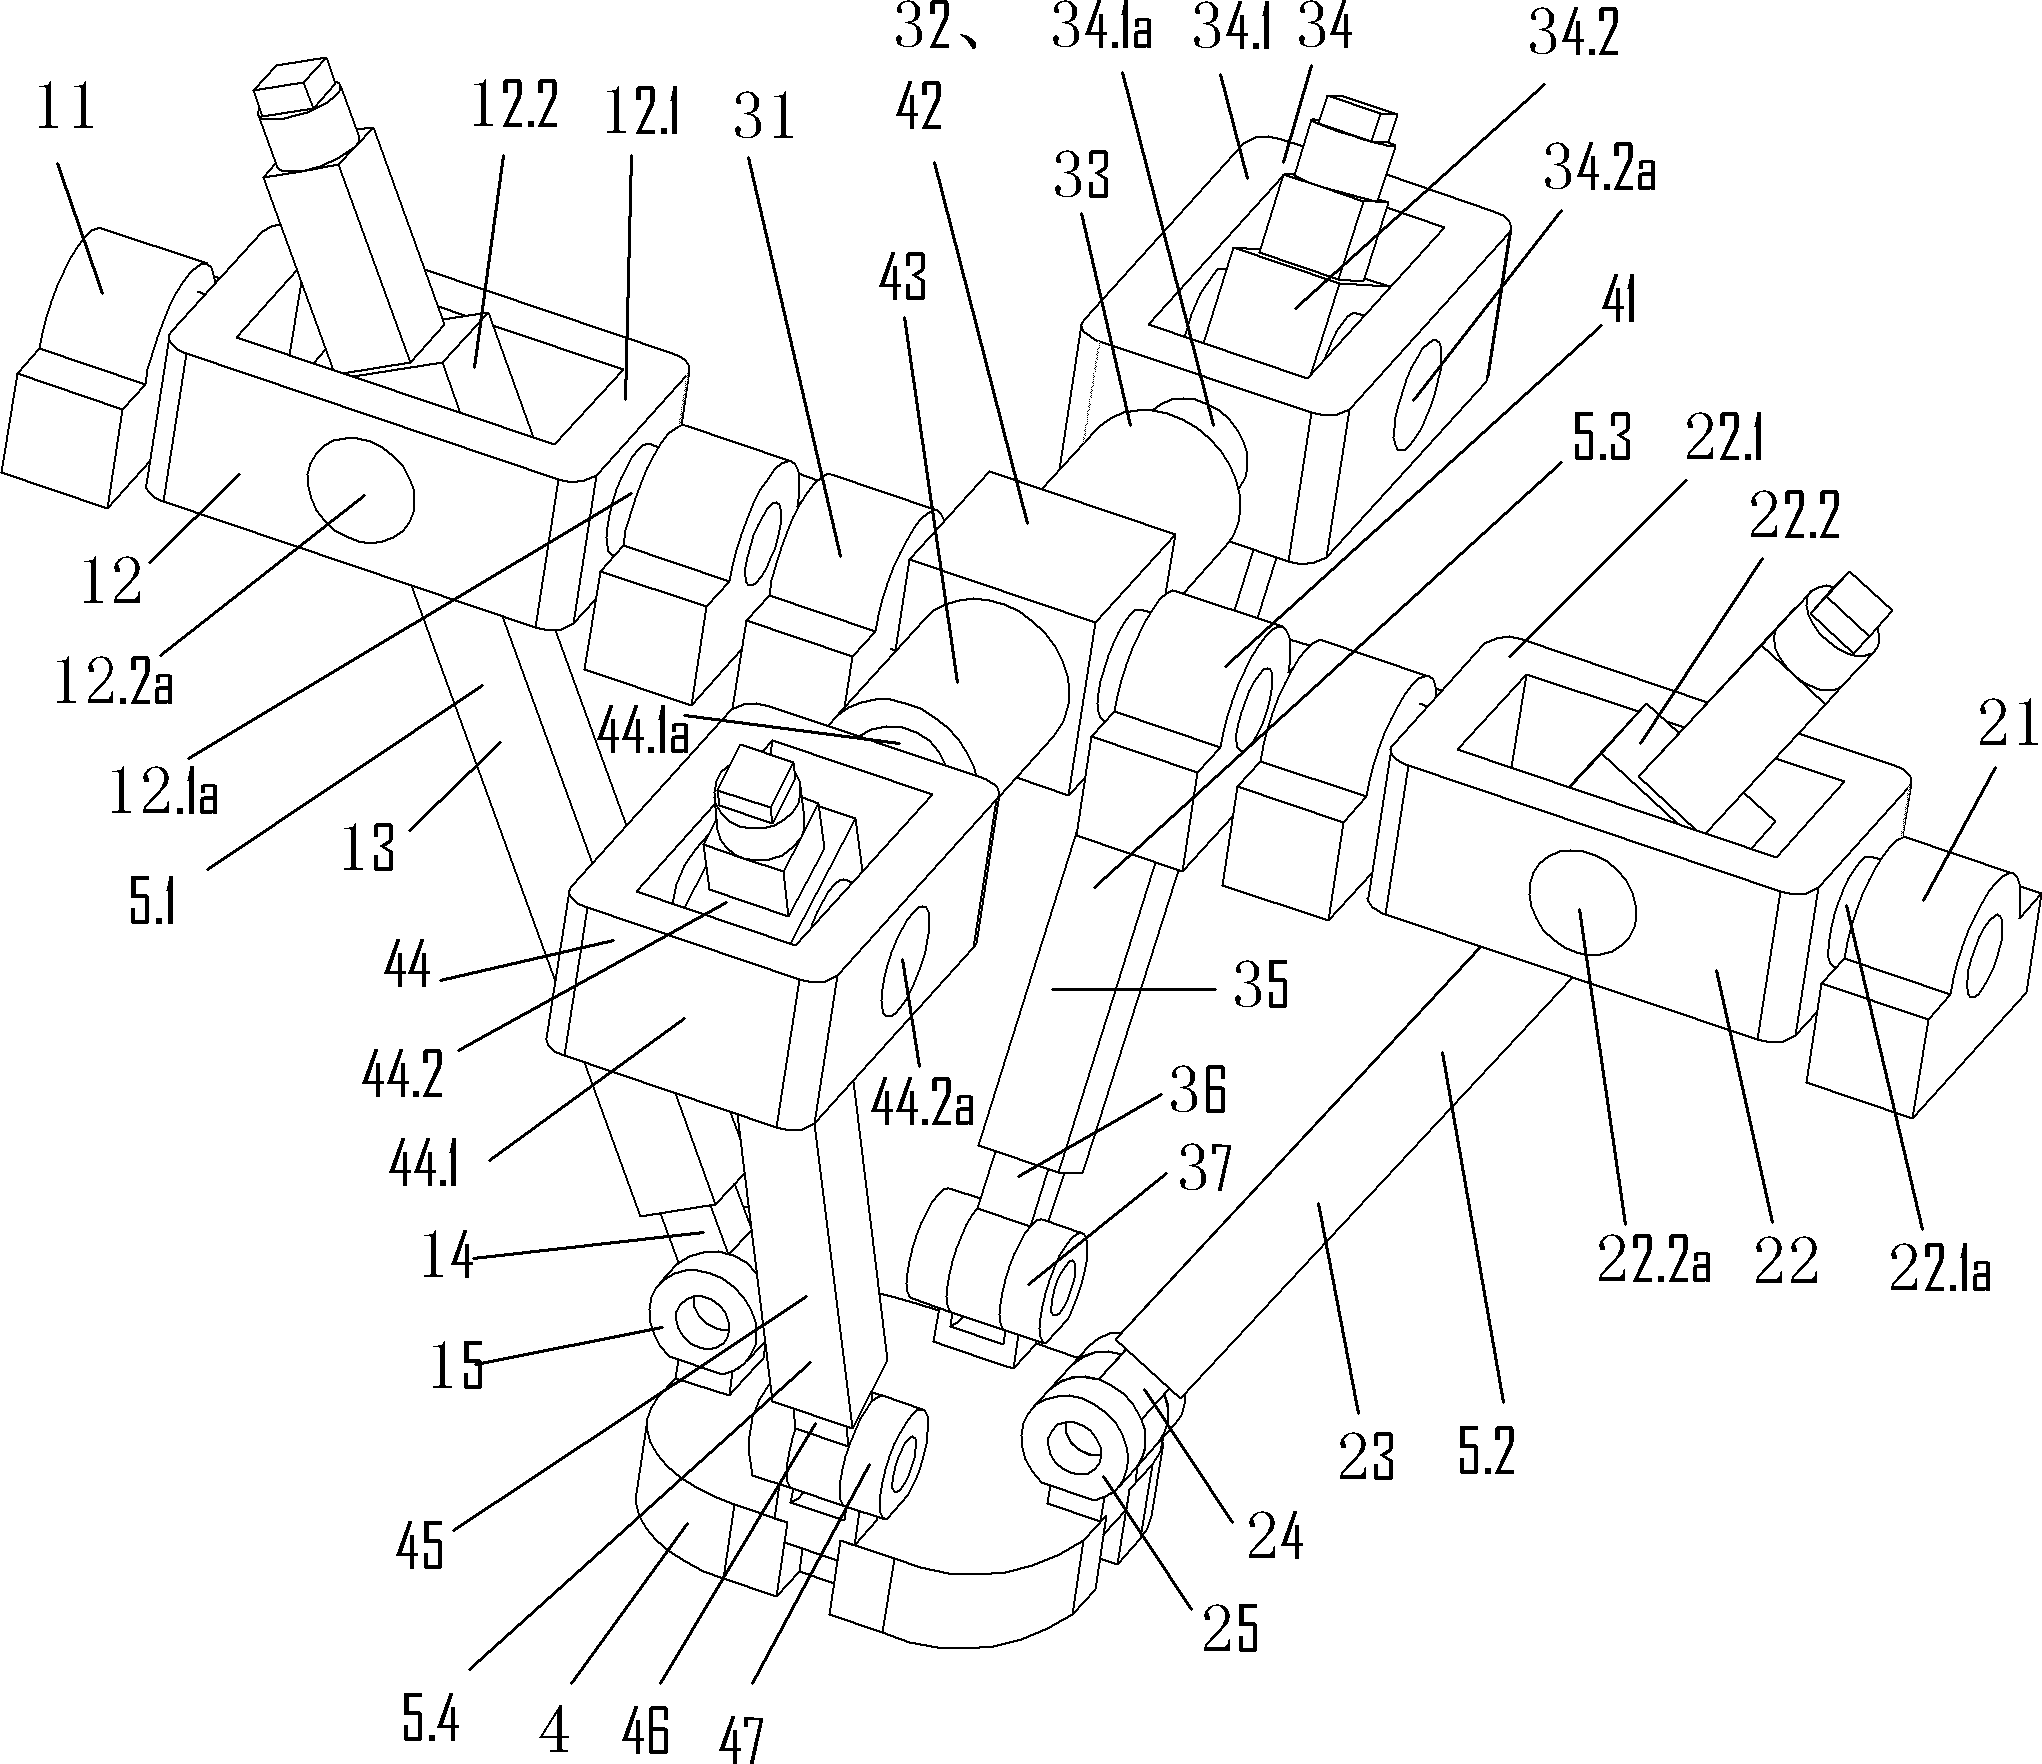 Three- DOF (degree of freedom) parallel mechanism with two vertical intersecting rotating shafts